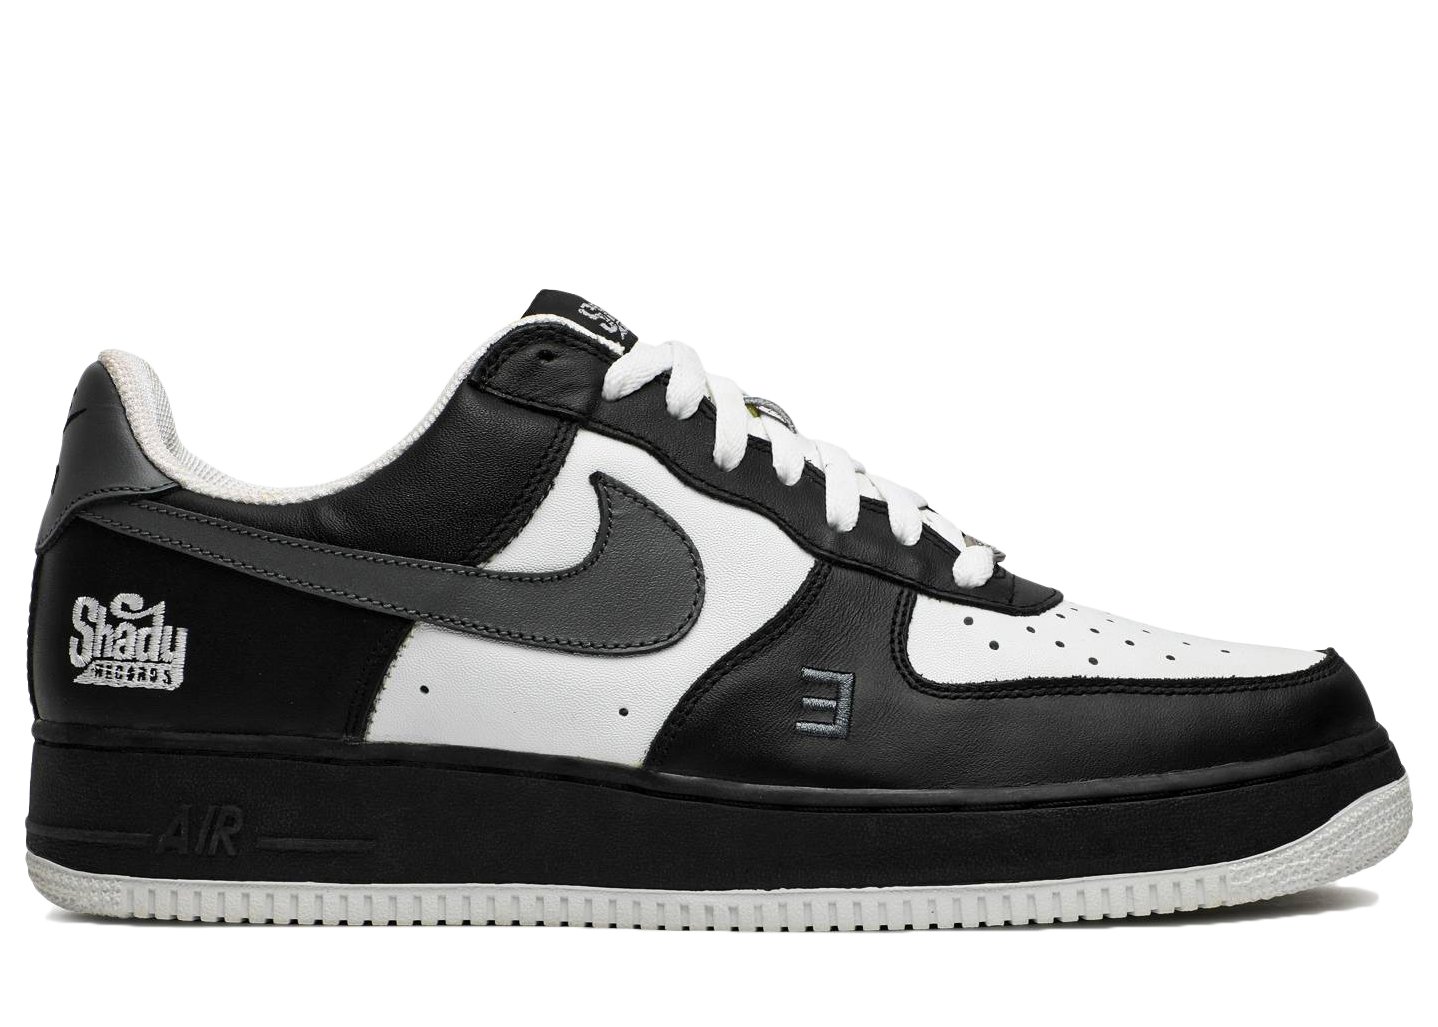 Nike Air Force 1 Low x Eminem 'Shady Records' Black sneakers